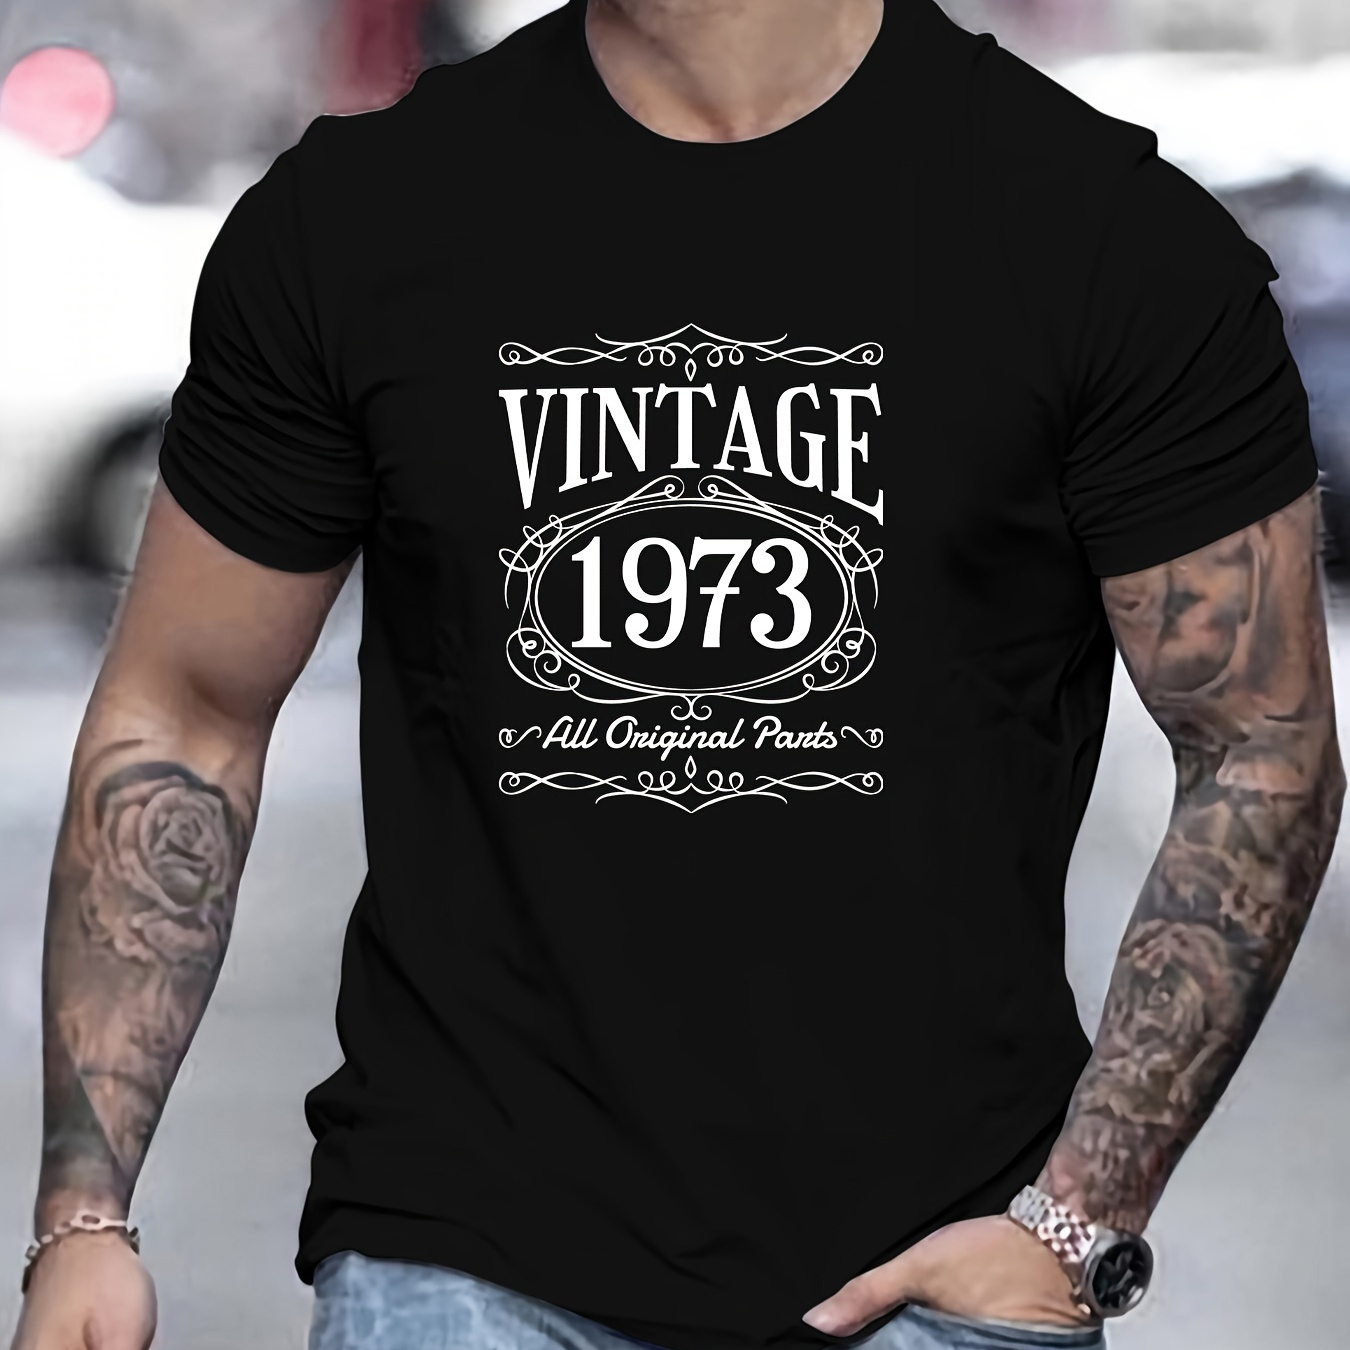 

Vintage 1973 Print T Shirt, Tees For Men, Casual Short Sleeve T-shirt For Summer